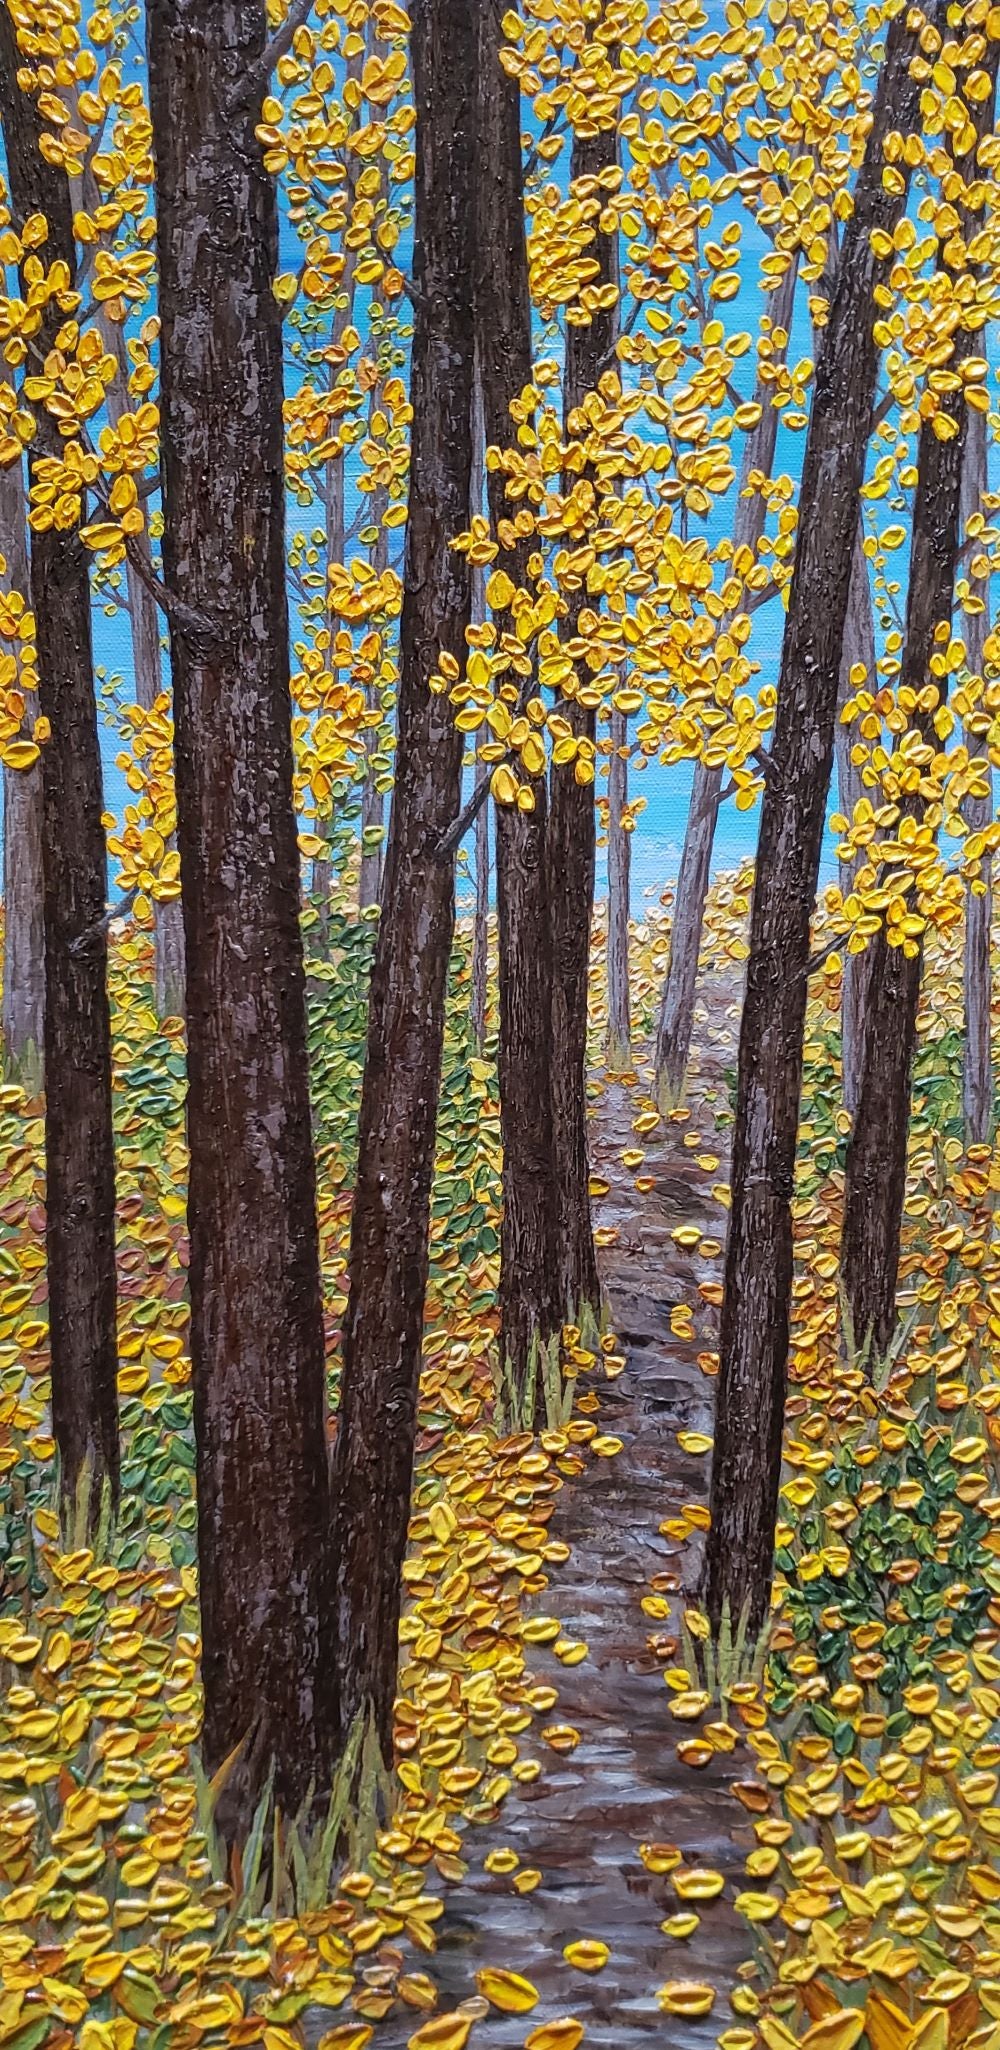 Canadain landscape Artists Painting of Yellow trees